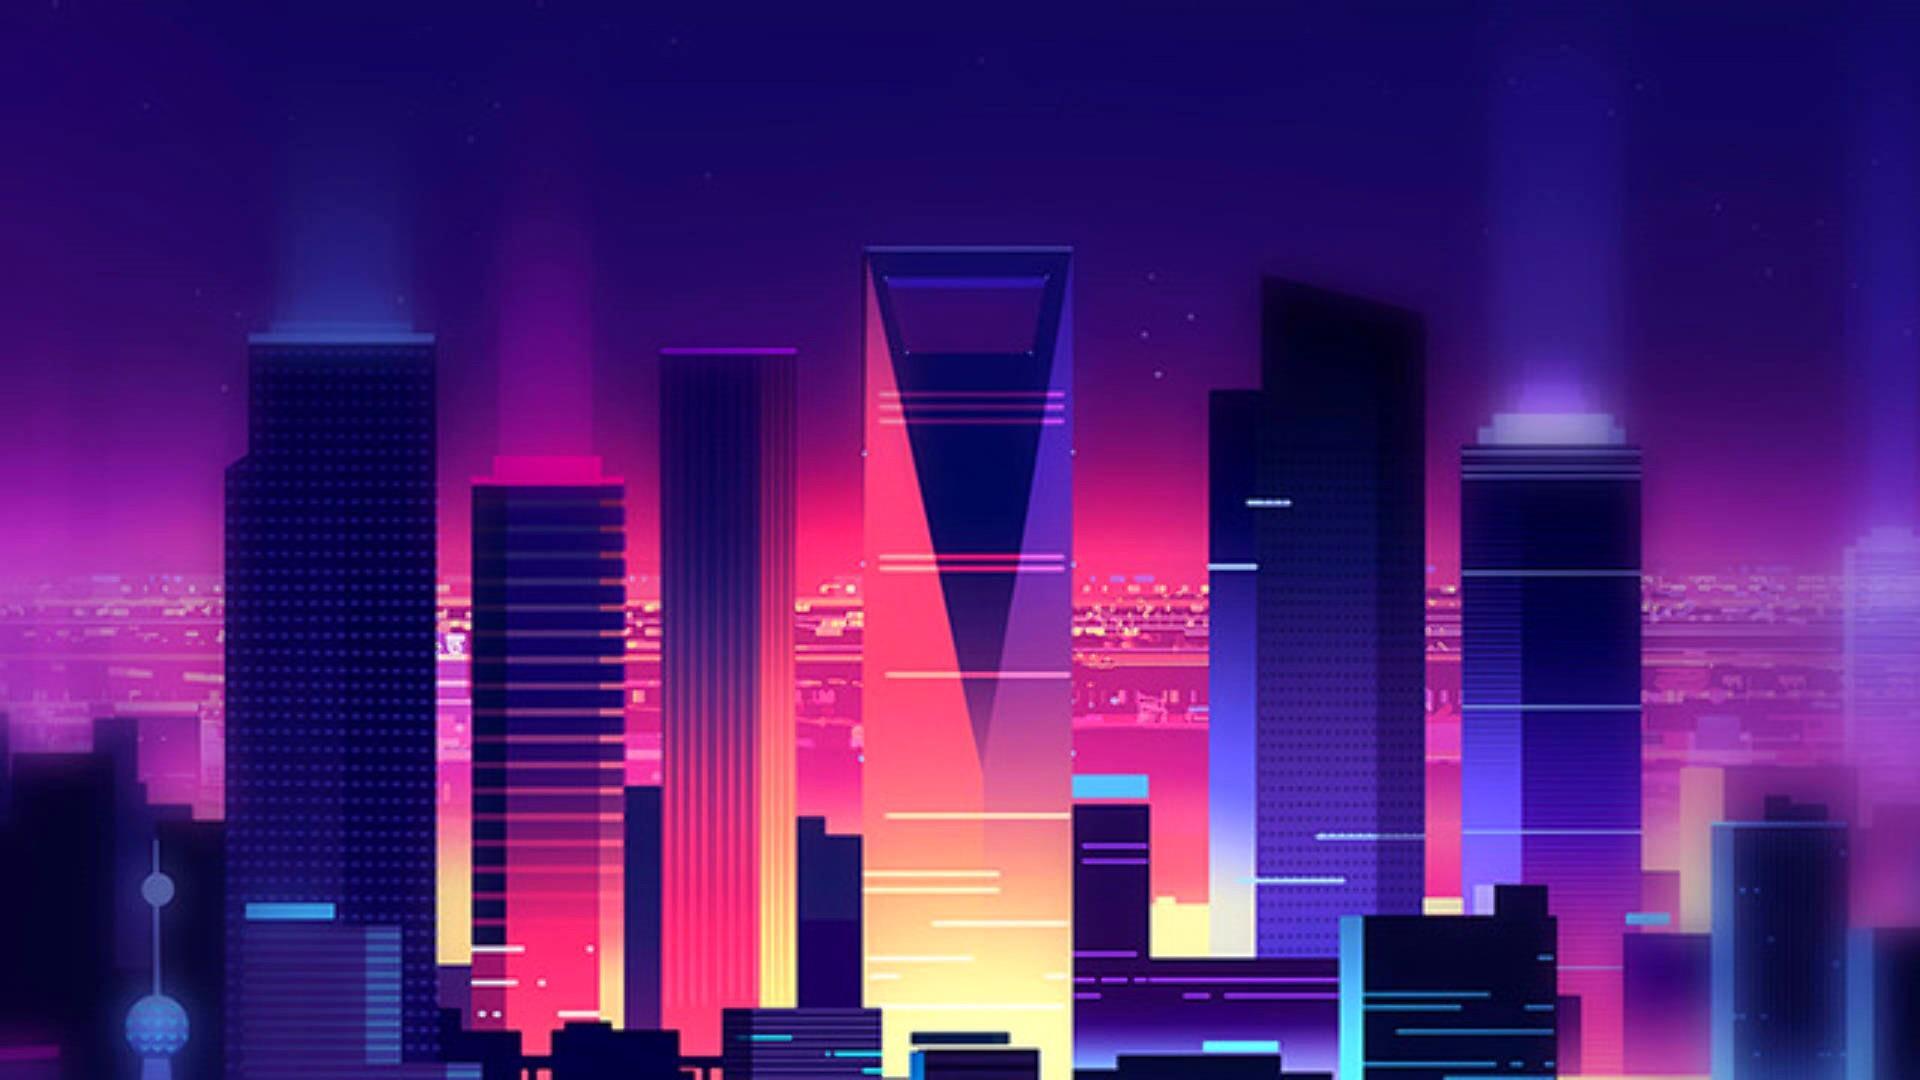 Anybody have a similar image for iPhone X wallpaper?